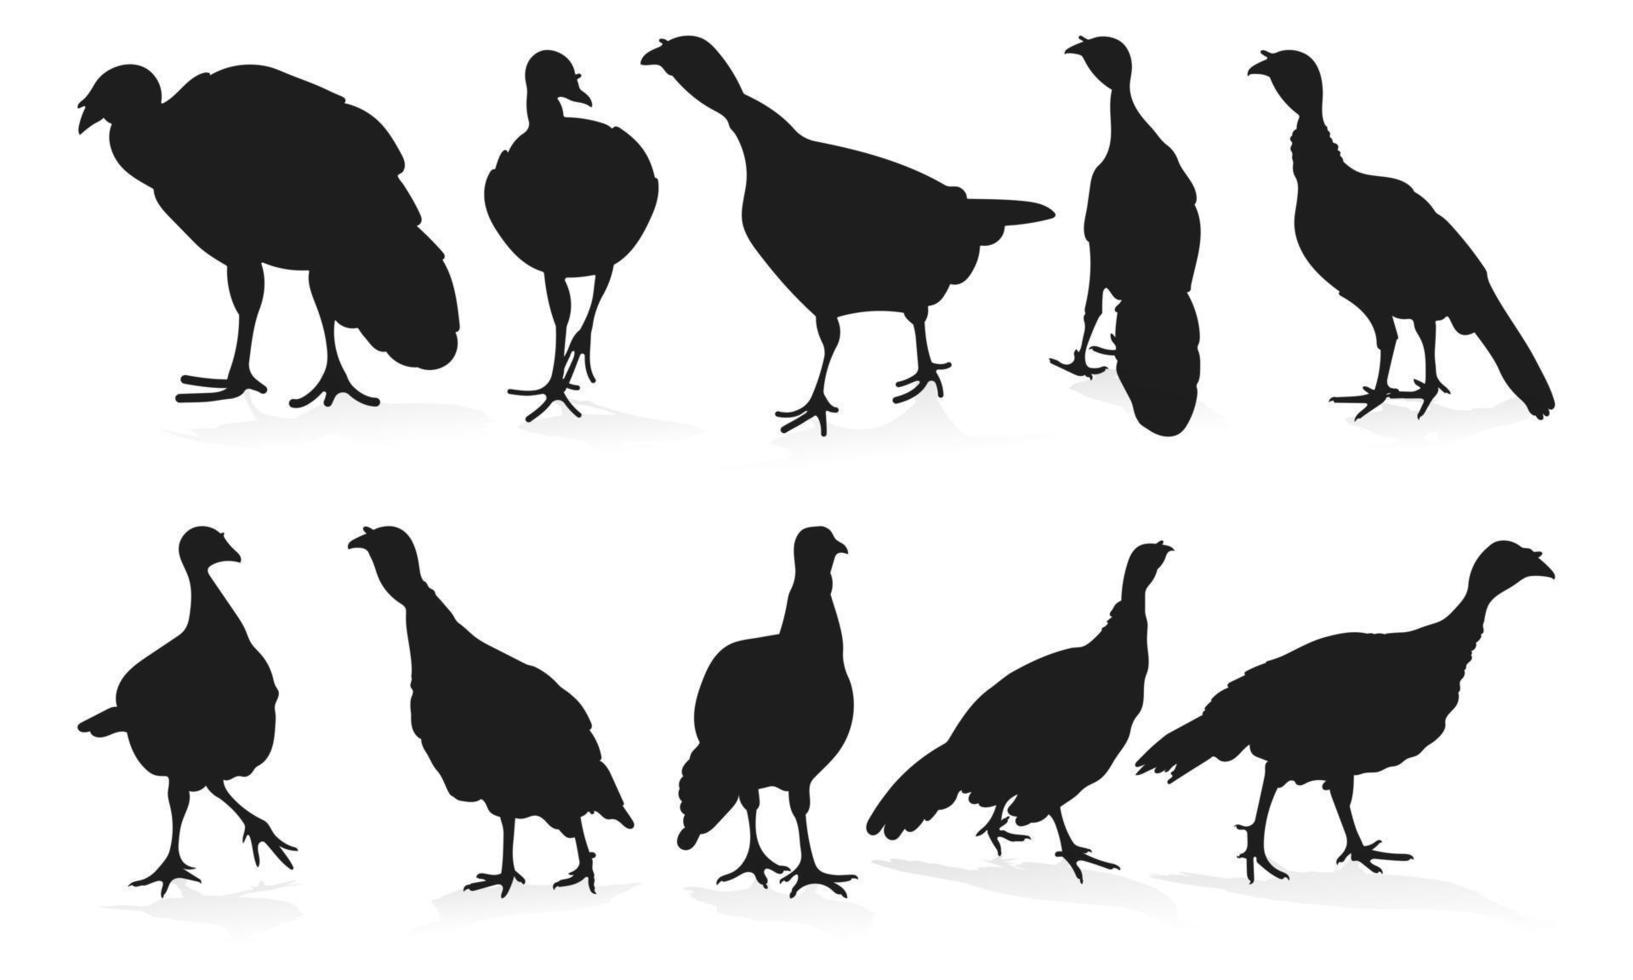 Turkey, gobbler, position standing, walking, set poultry silhouettes hand drawn, isolated vector